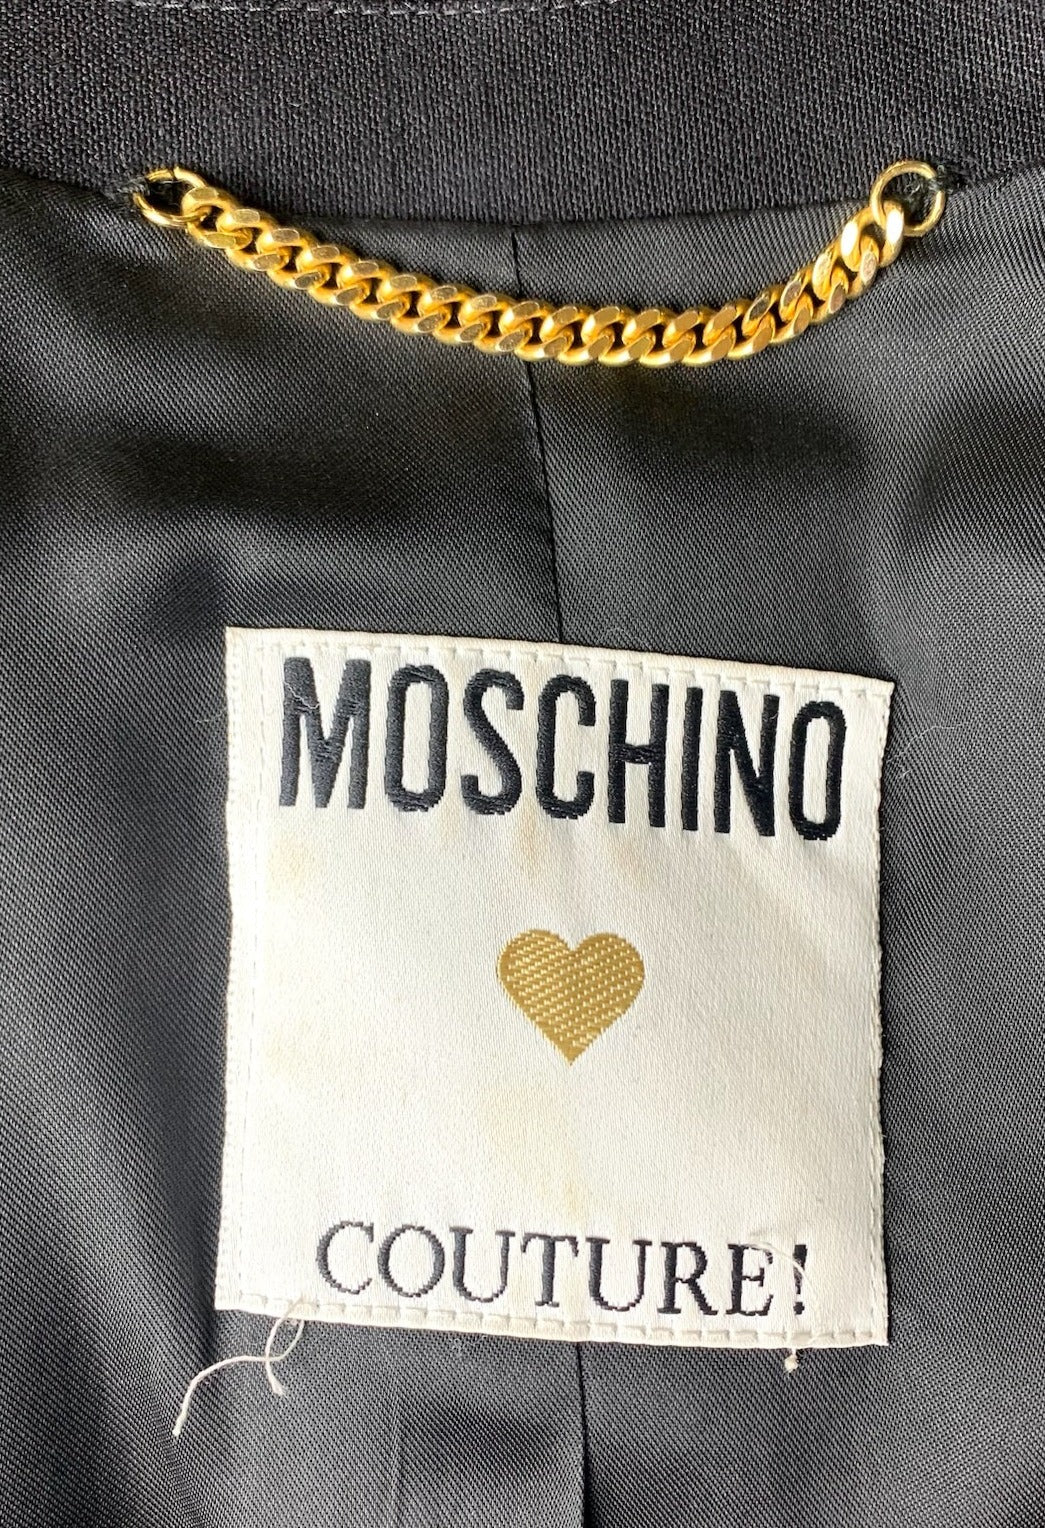 Moschino Fall/Winter 1989/1990 Black Wool "TAILLEUR" Skirt Suit LABEL 7 of 7